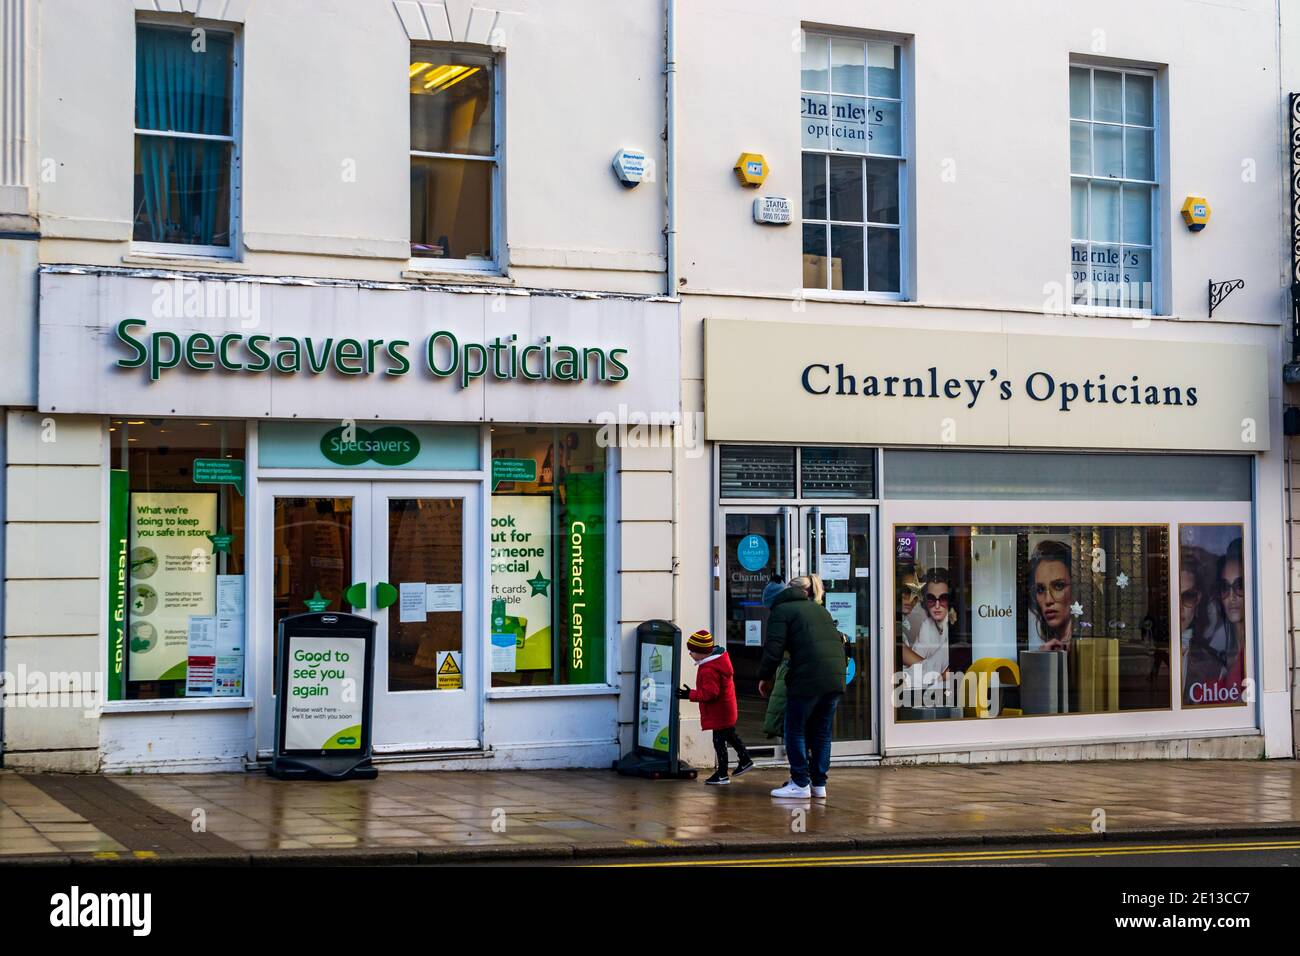 Two rival opticians side by side on Leamington Spa Parade, Warwickshire, UK. Specsavers Opticians and Charnley's Opticians. Stock Photo